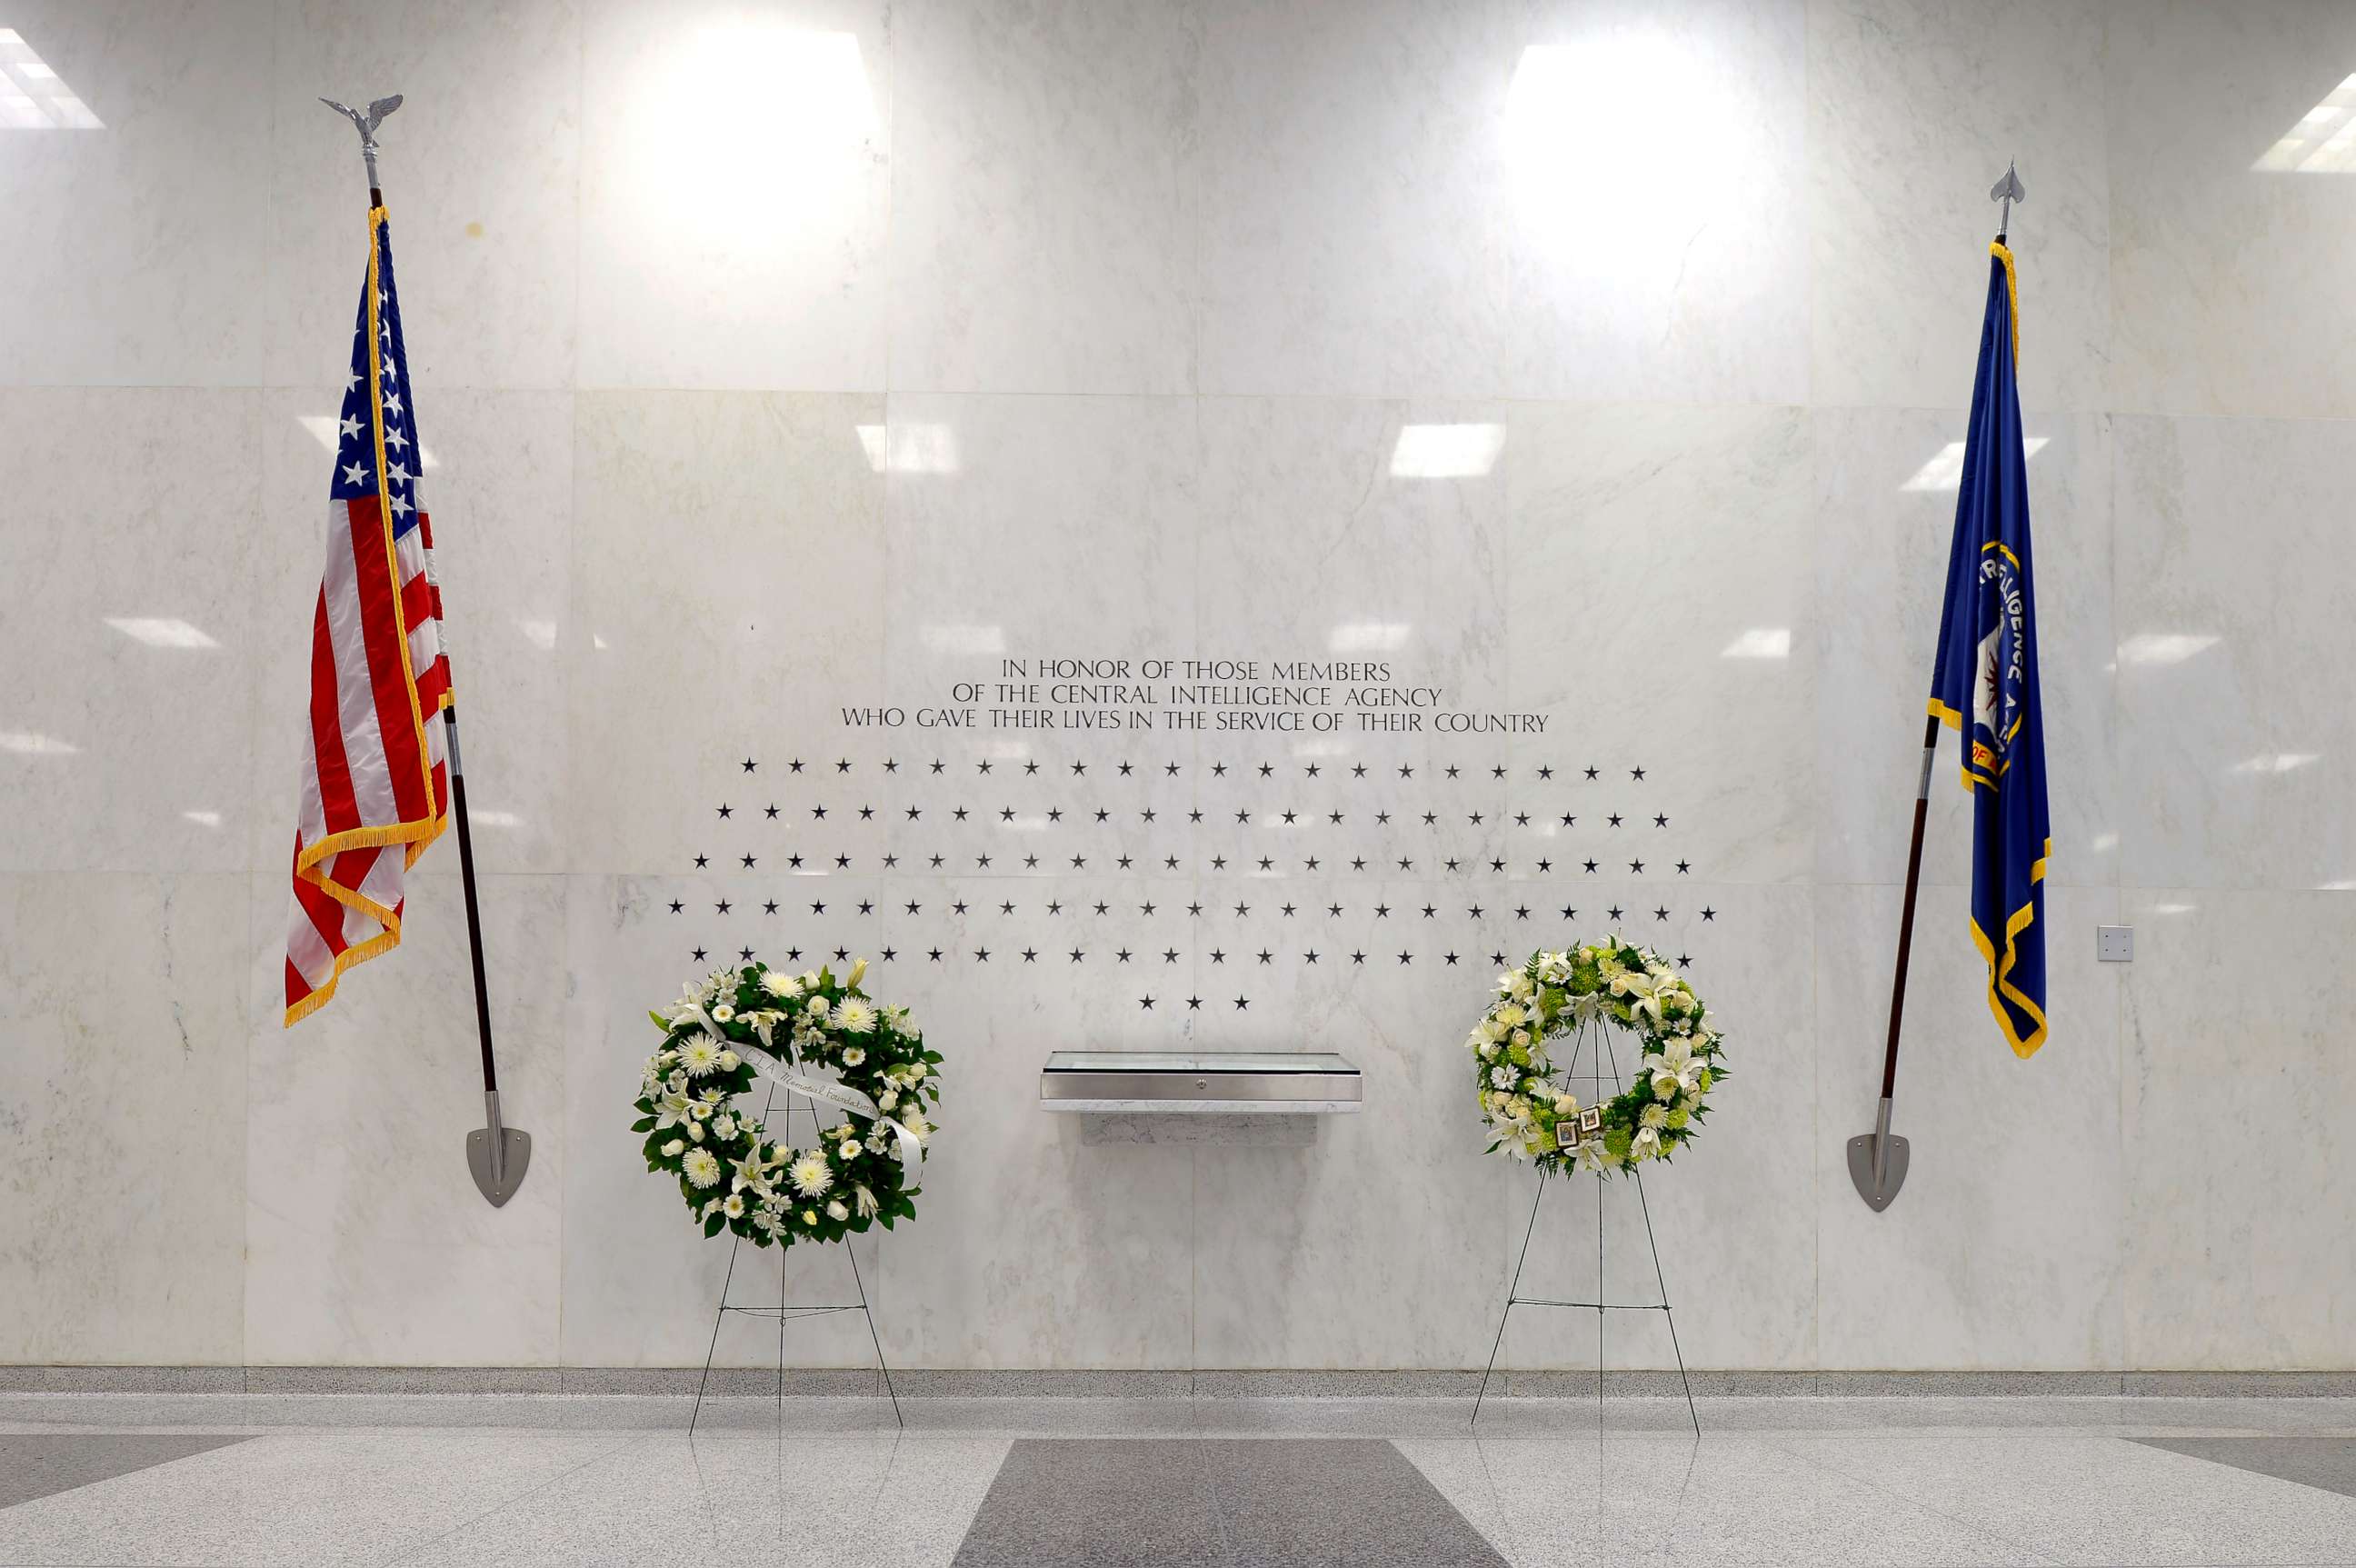 PHOTO: The CIA Memorial Wall in the lobby of the CIA Headquarters has stars signifying the agents and contractors killed in the line of duty working for the CIA.